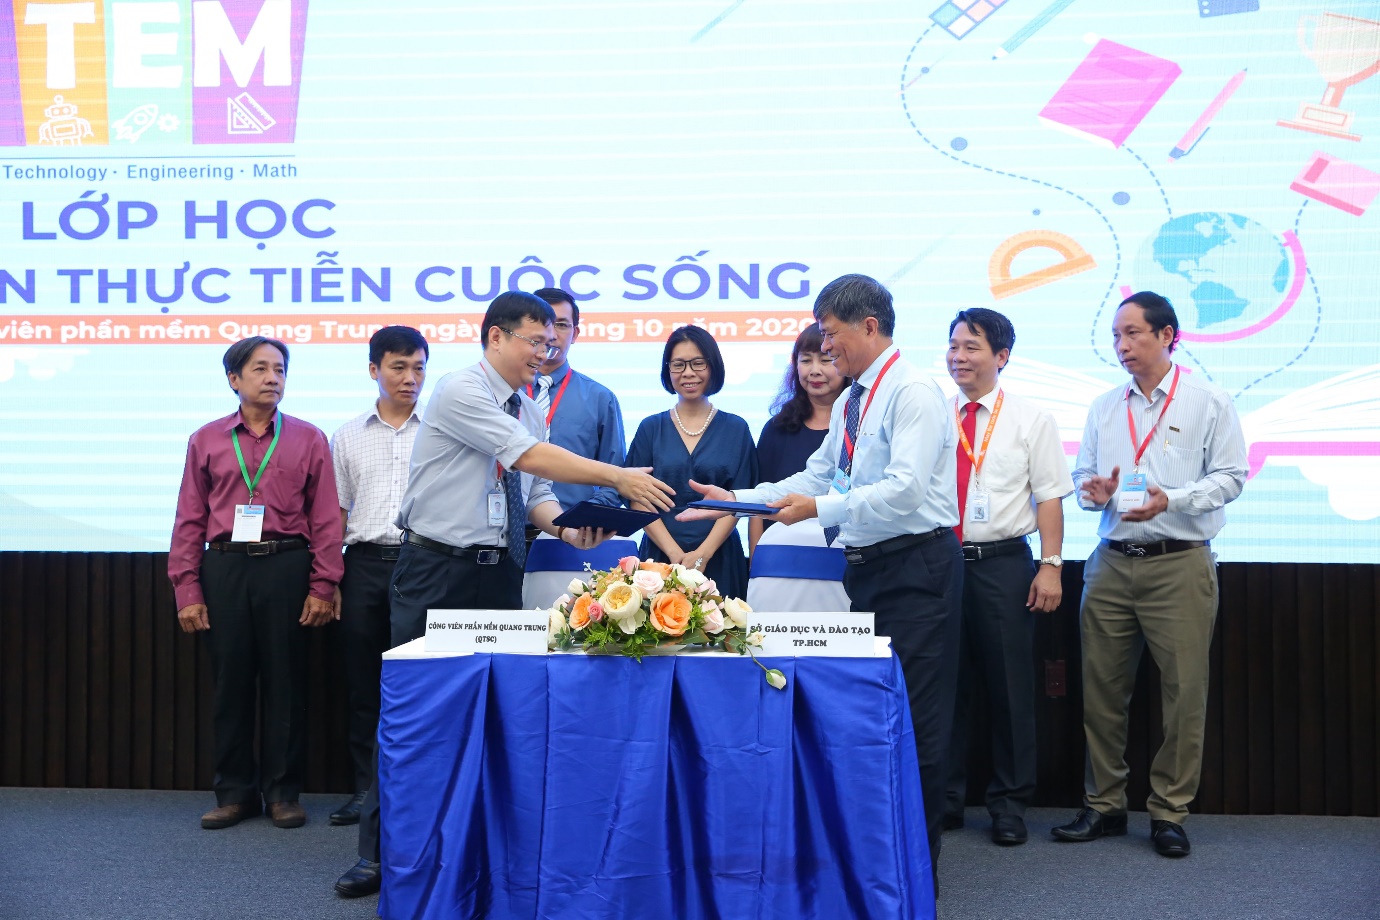 QTSC and Department of Education and Training of Ho Chi Minh City signed an agreement to promote STEM education